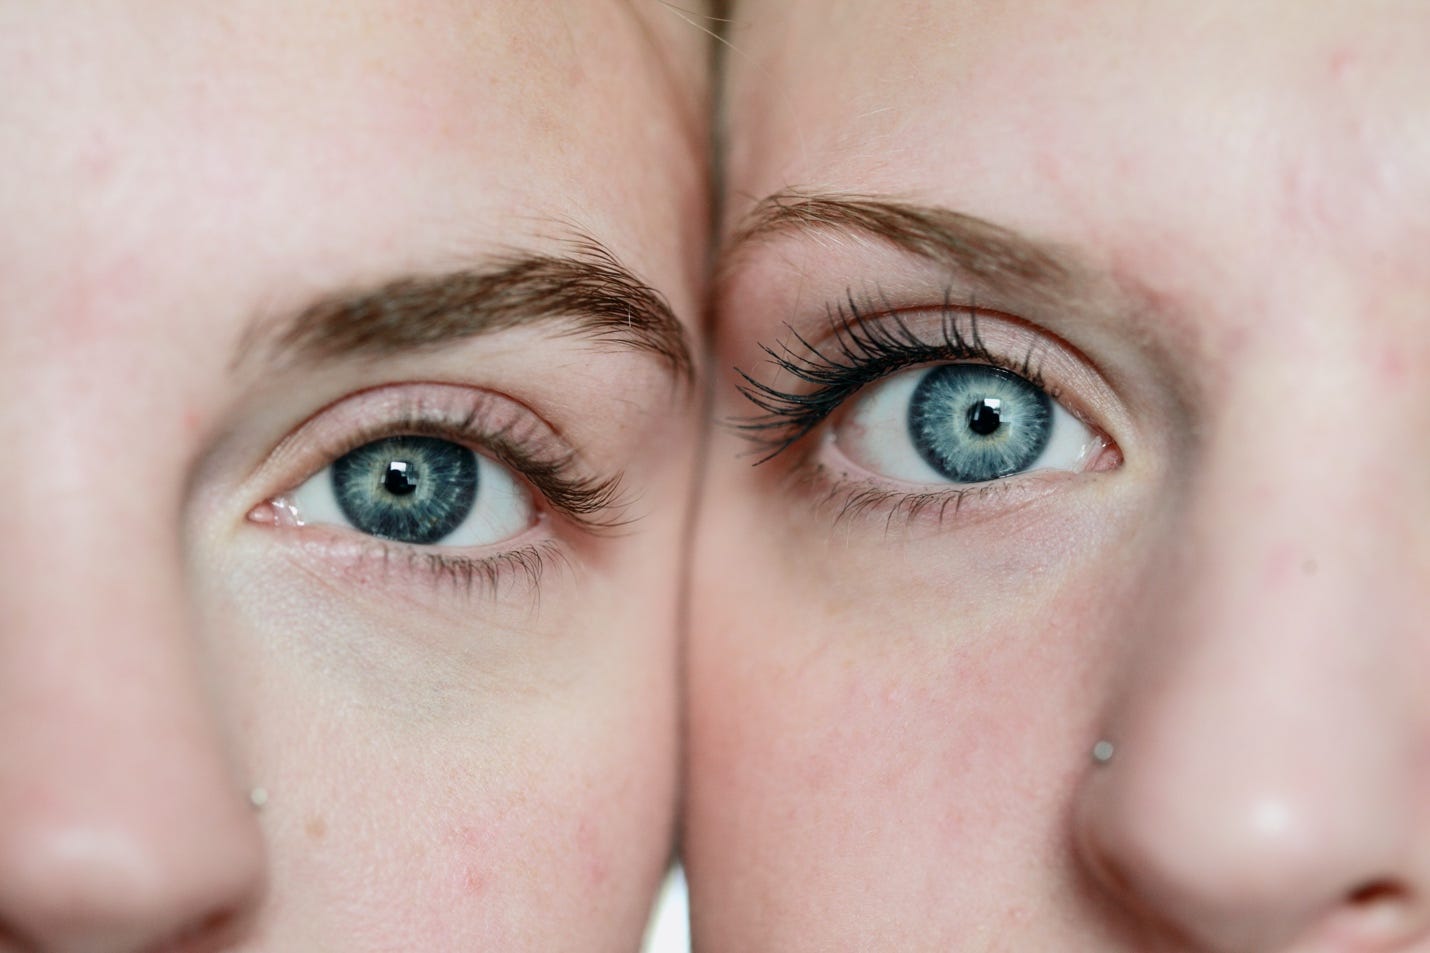 Close-up of a person's eyes

Description automatically generated